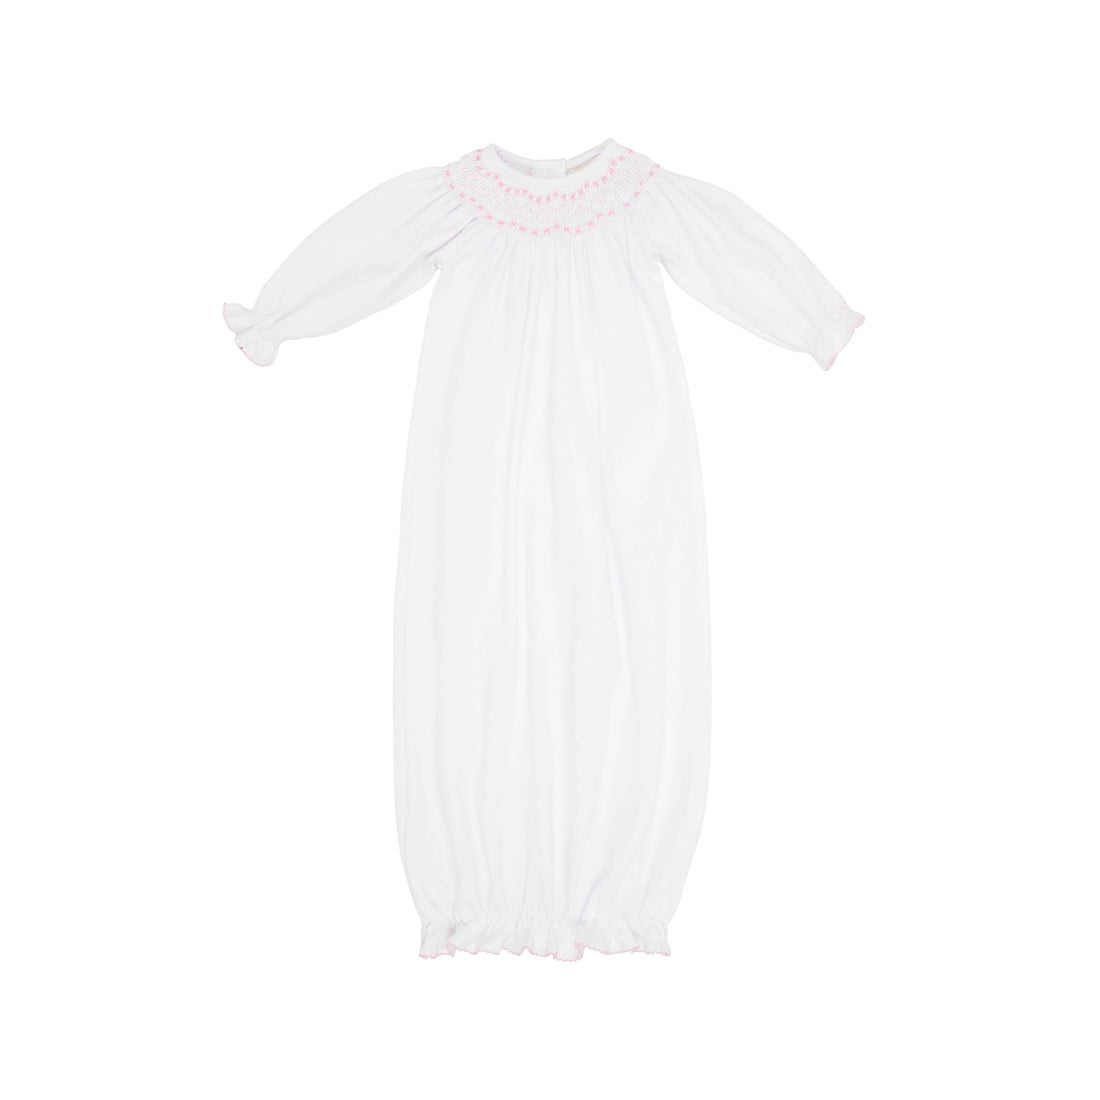 Beaufort Bonnet Sweetly Smocked Greeting Gown- Worth Avenue White With Palm Beach Pink